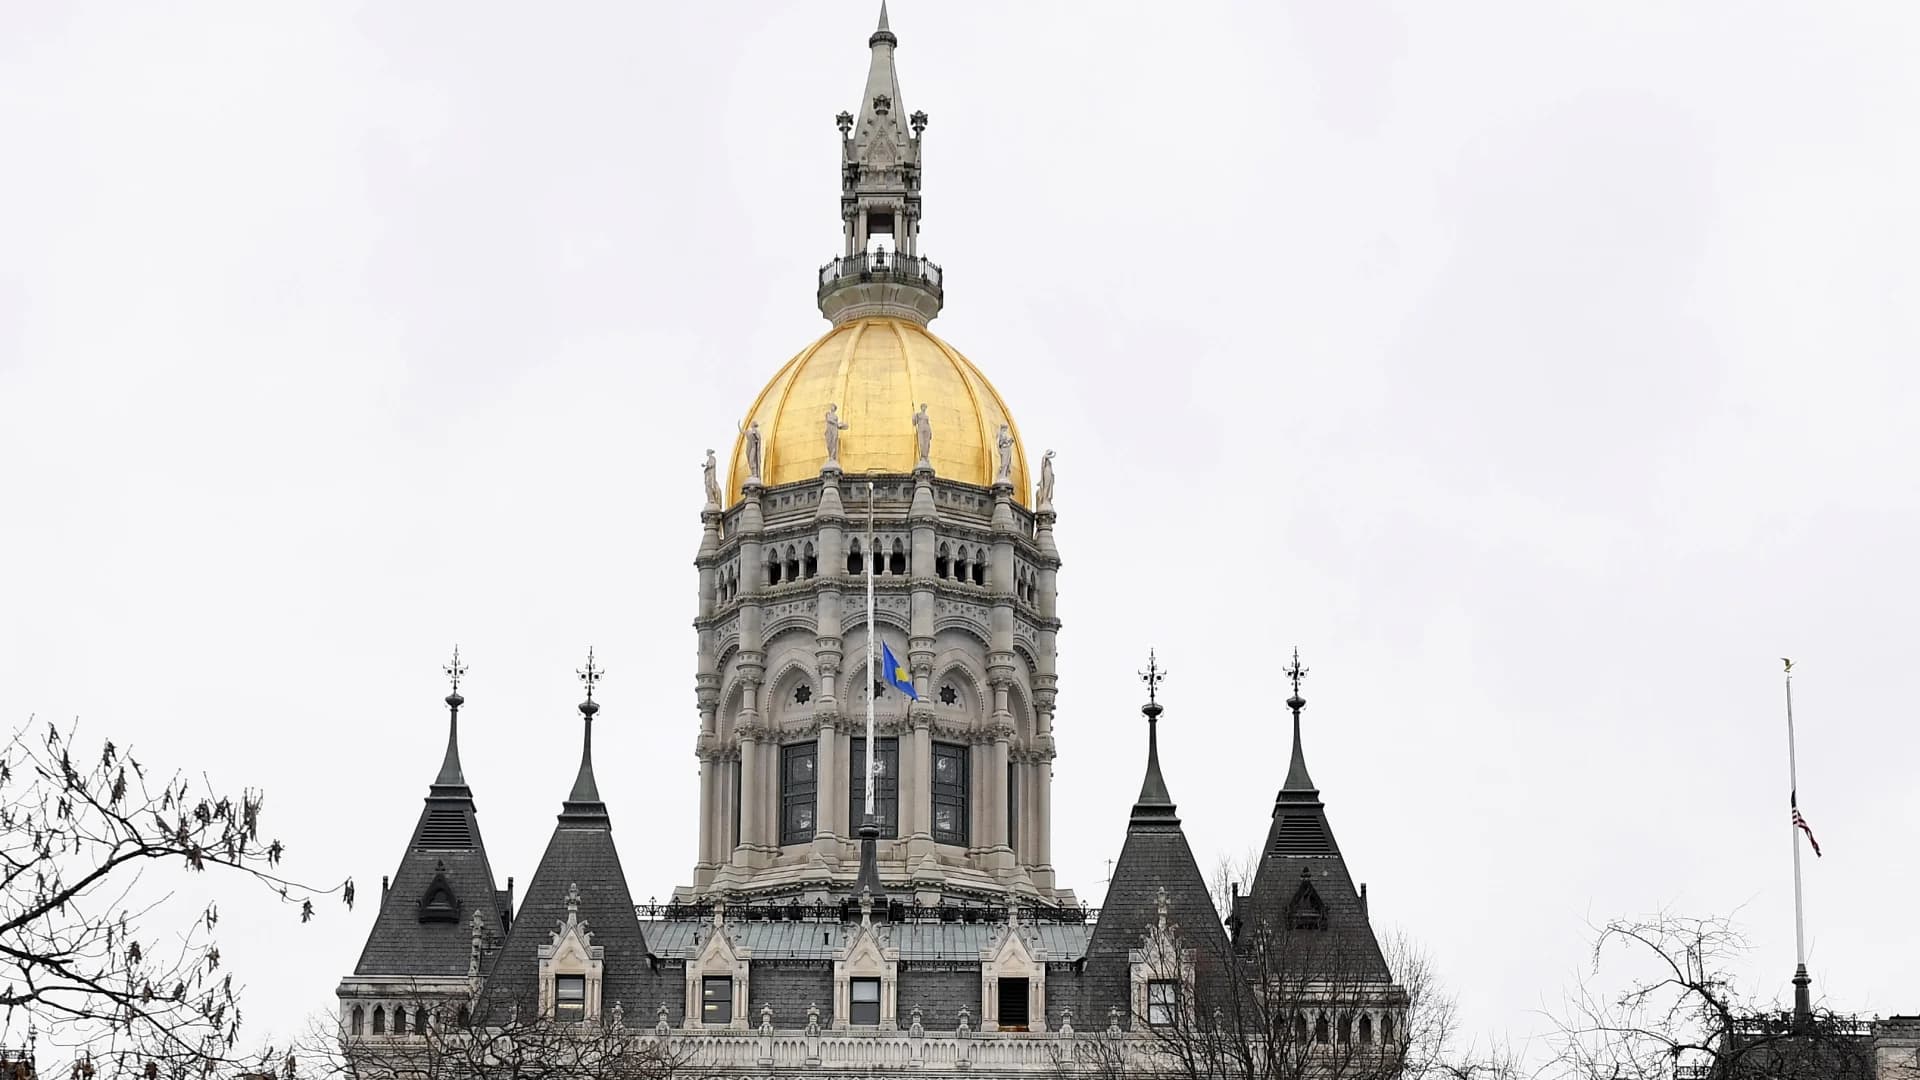 All persons entering Connecticut Capitol buildings required to wear mask